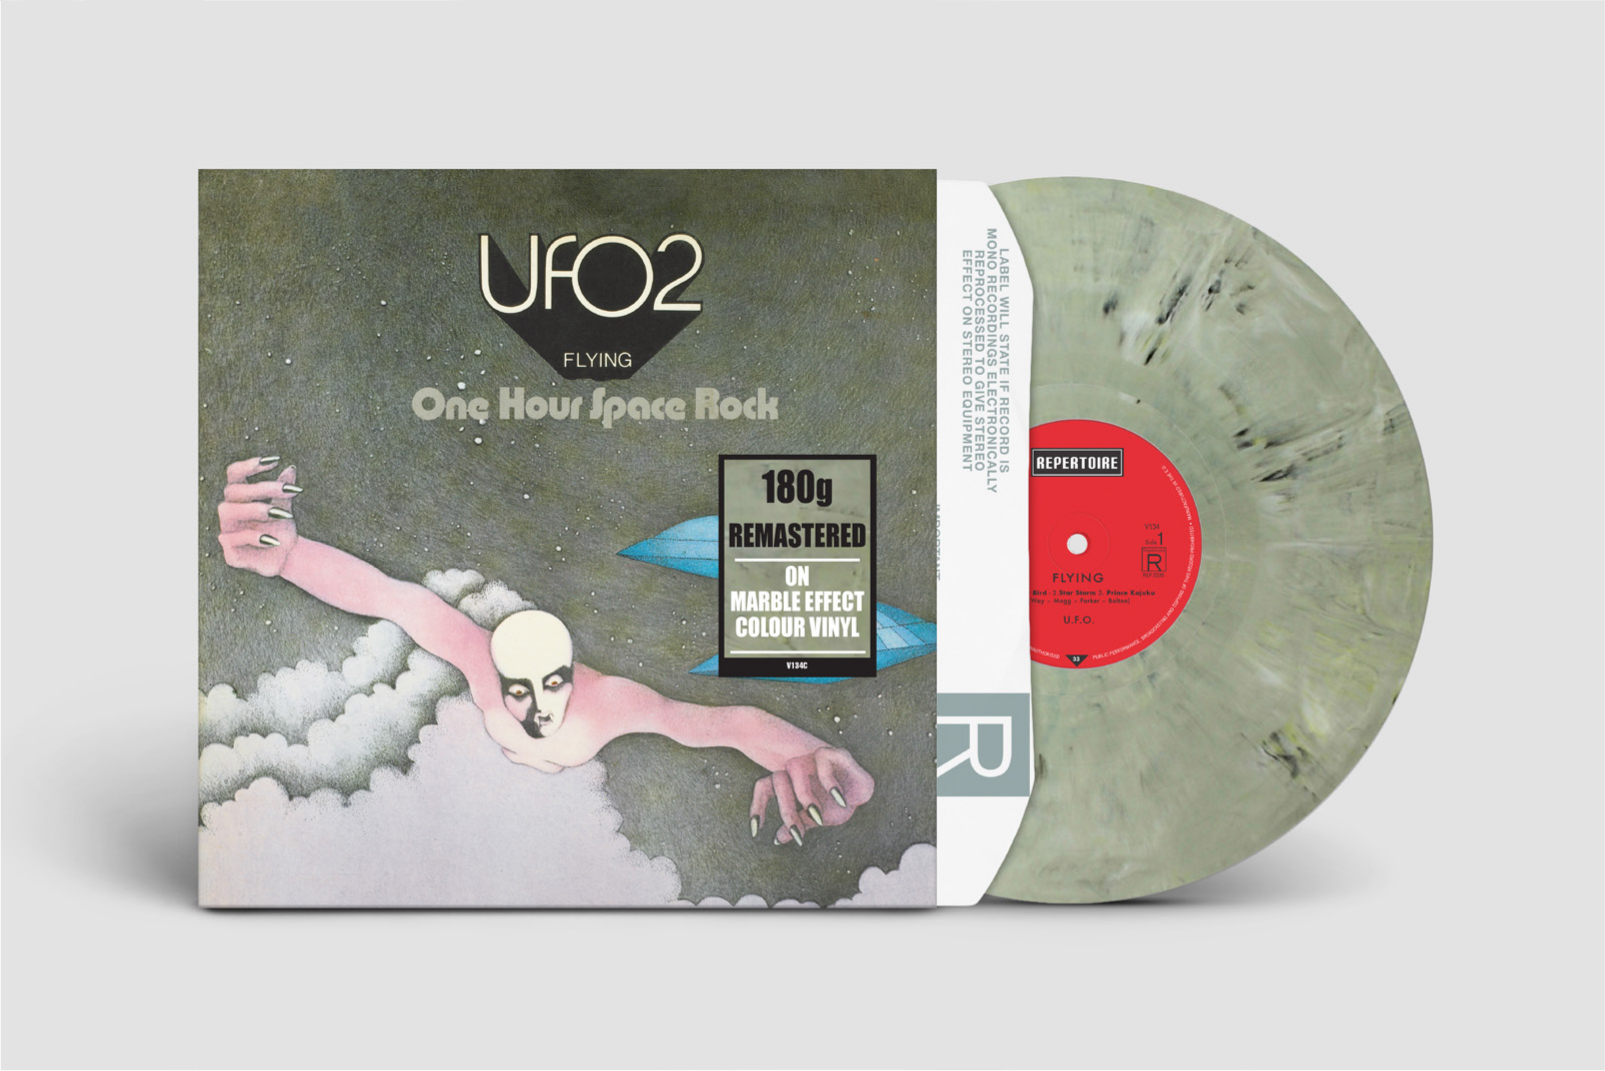 UFO 2: One Hour Space Rock